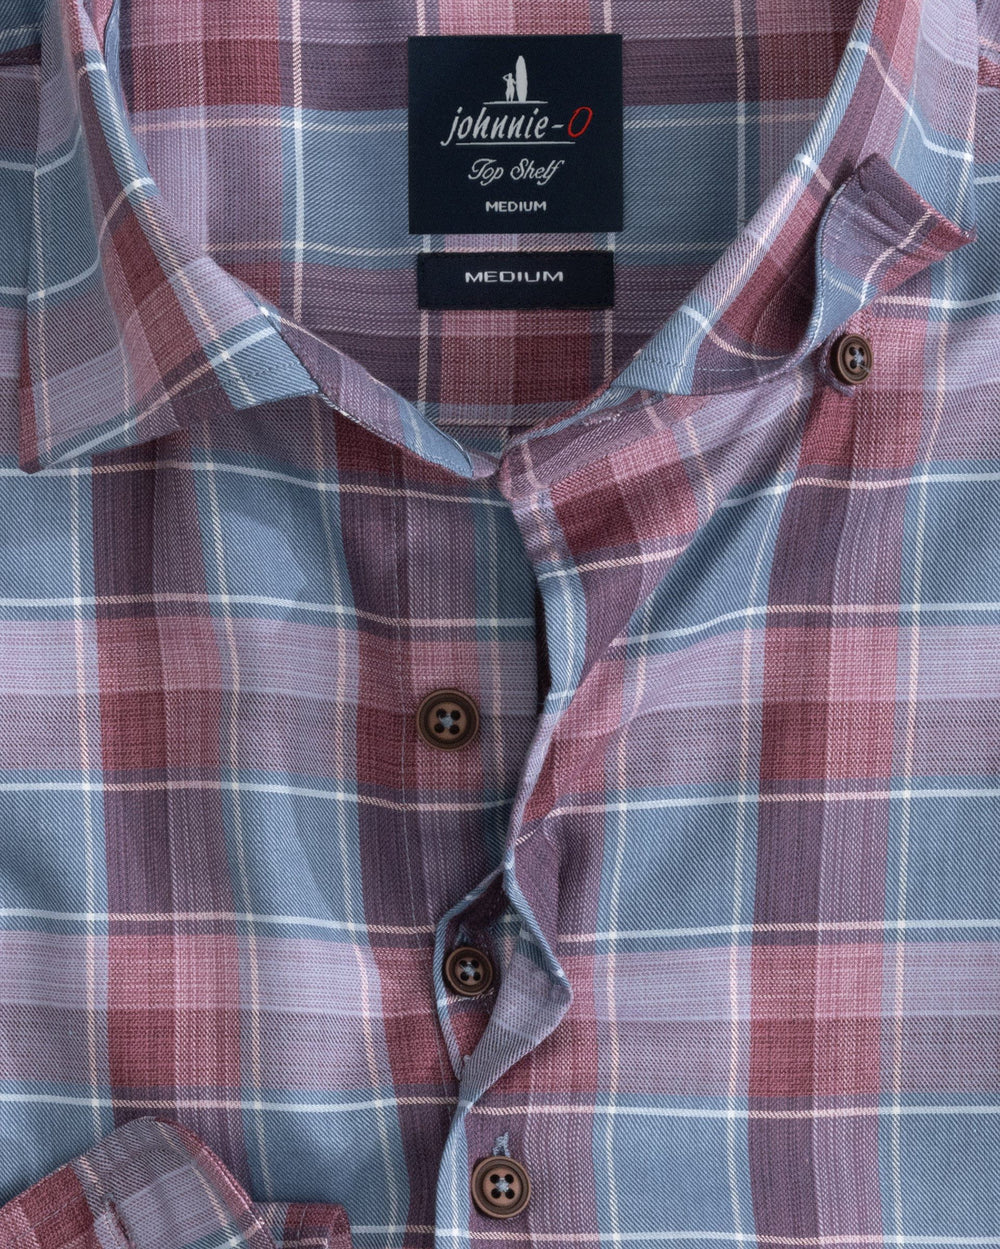 Andes Top Shelf Button Up Shirt